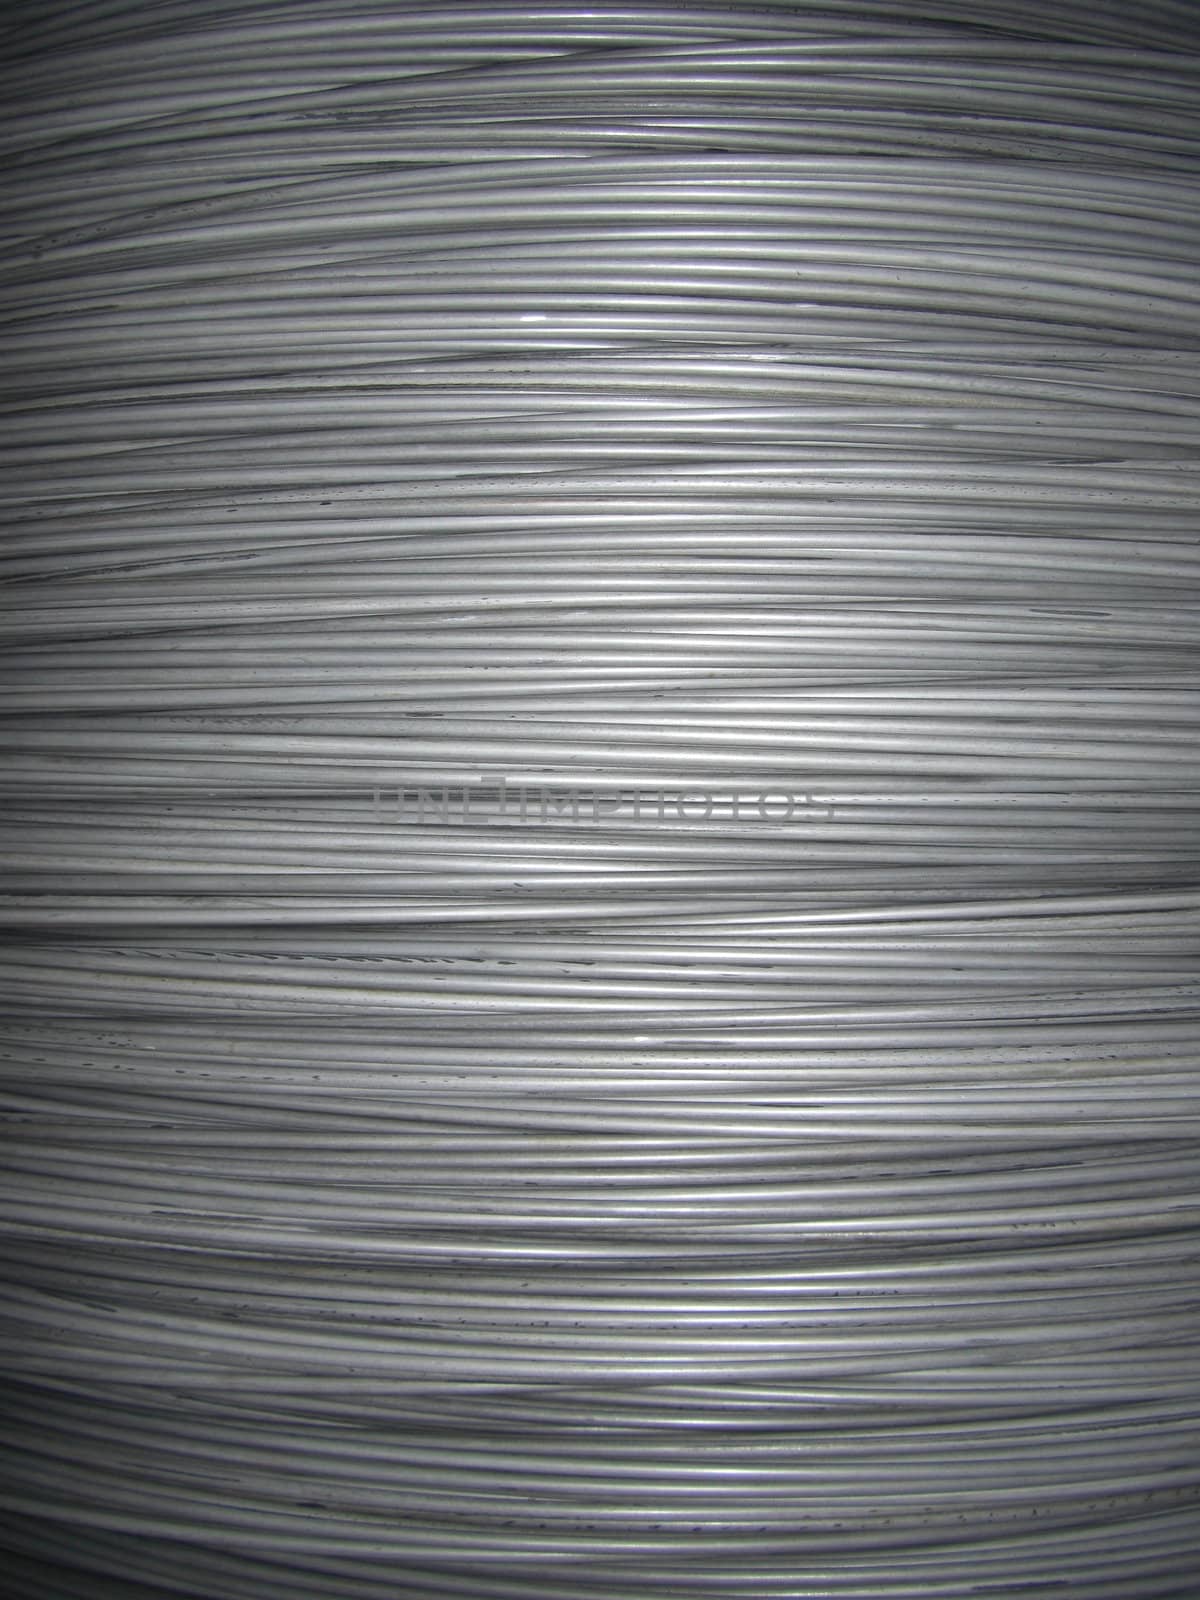 close up of steel wire